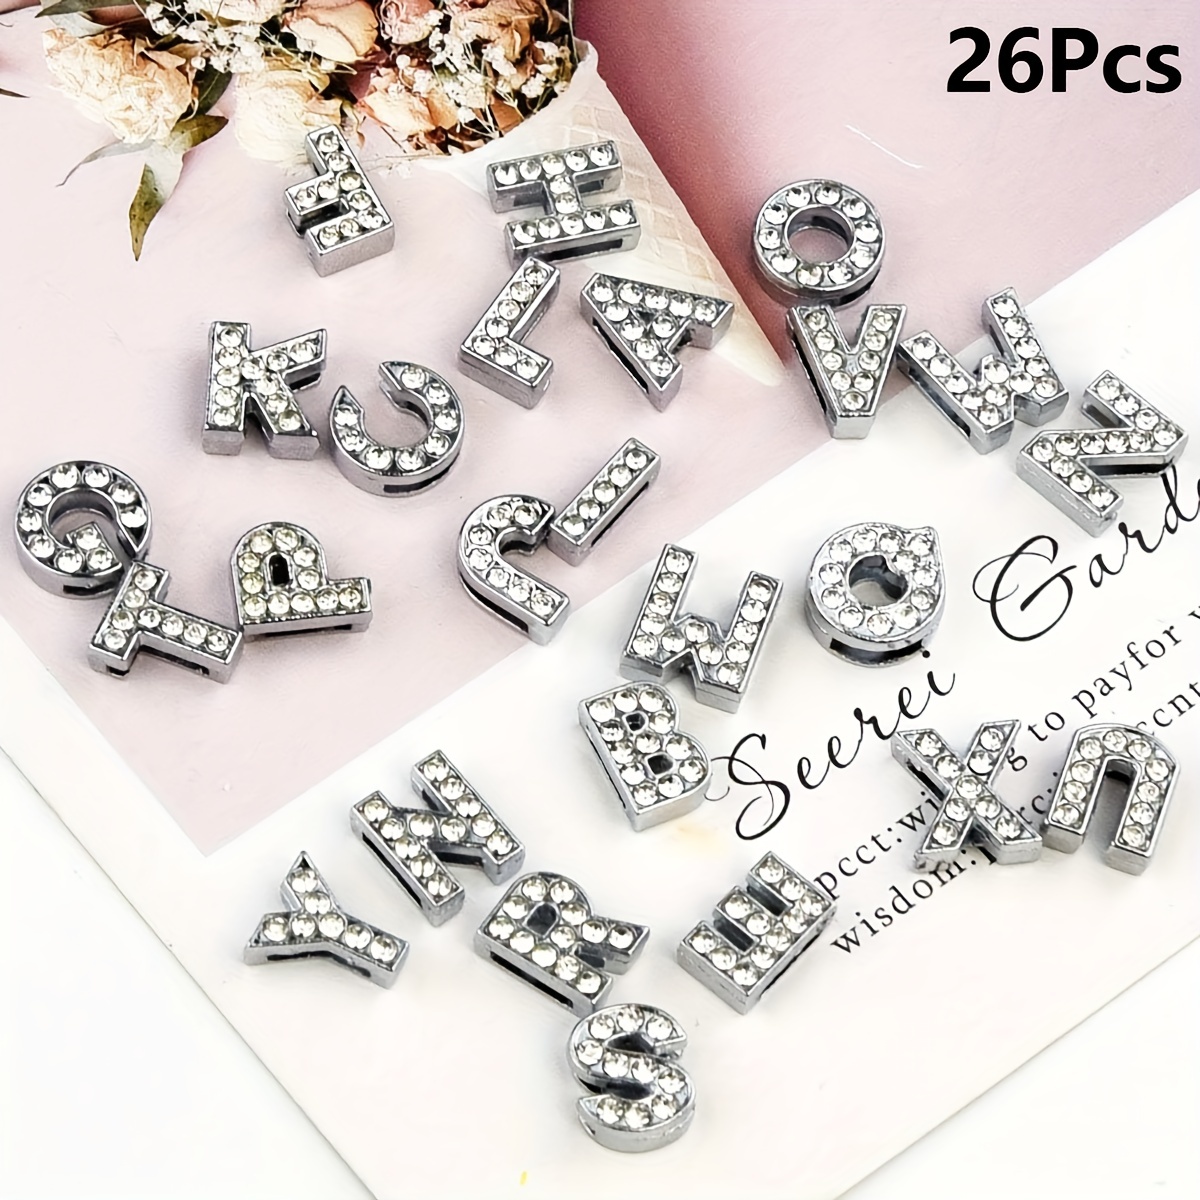 8mm silver Russian letters jewellery making materials slider